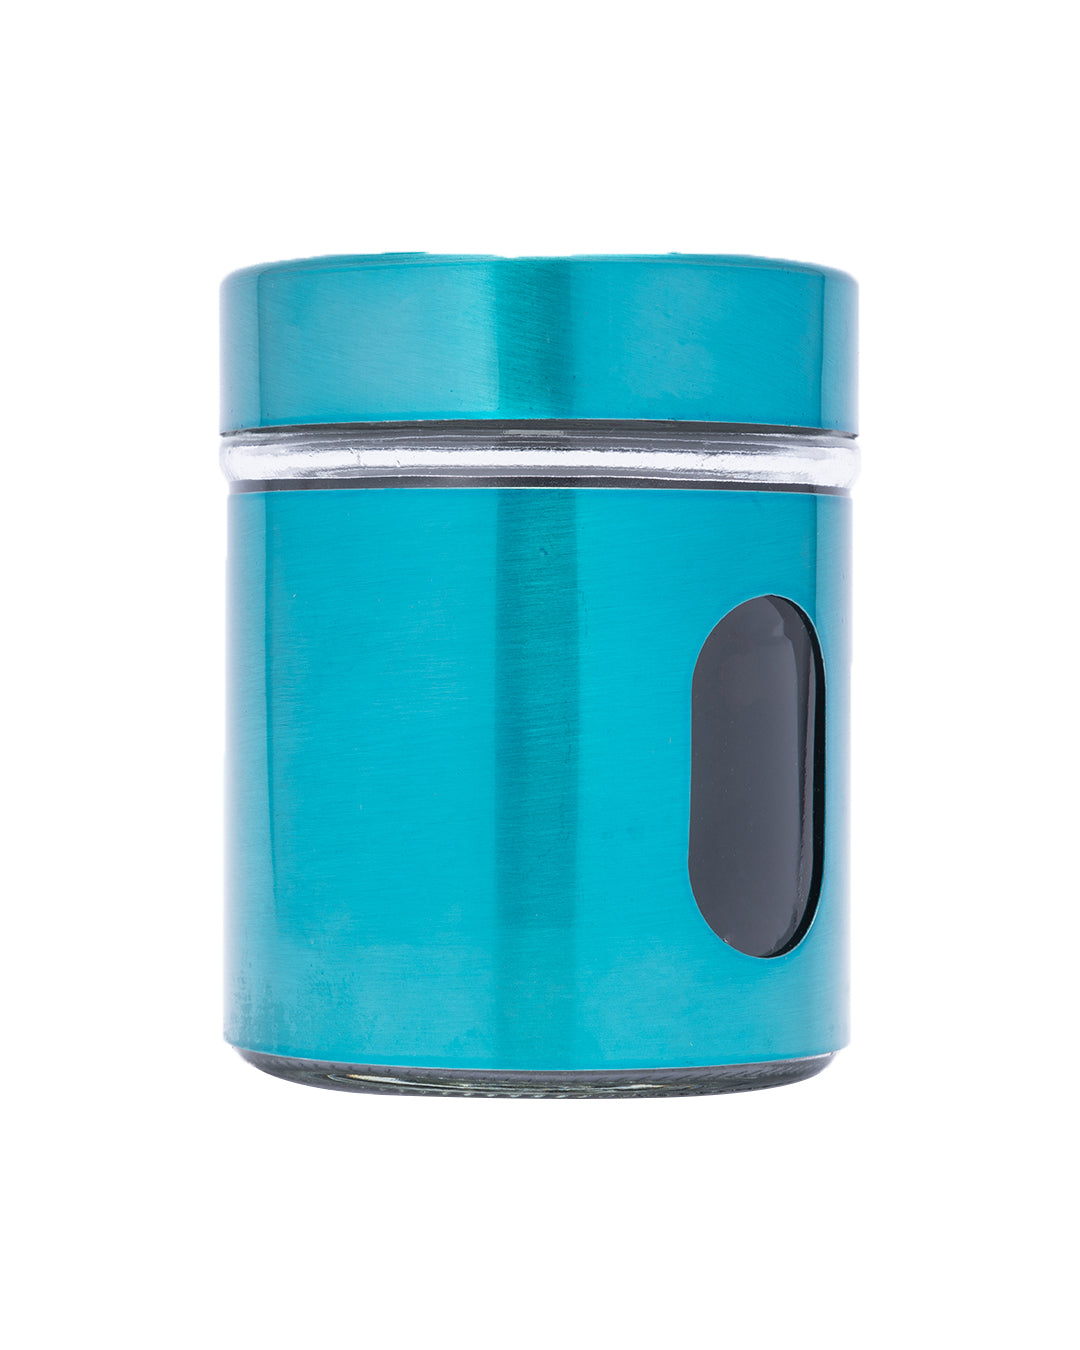 VON CASA Brushed Jars, Canisters with Window - Set of 3, 350 mL